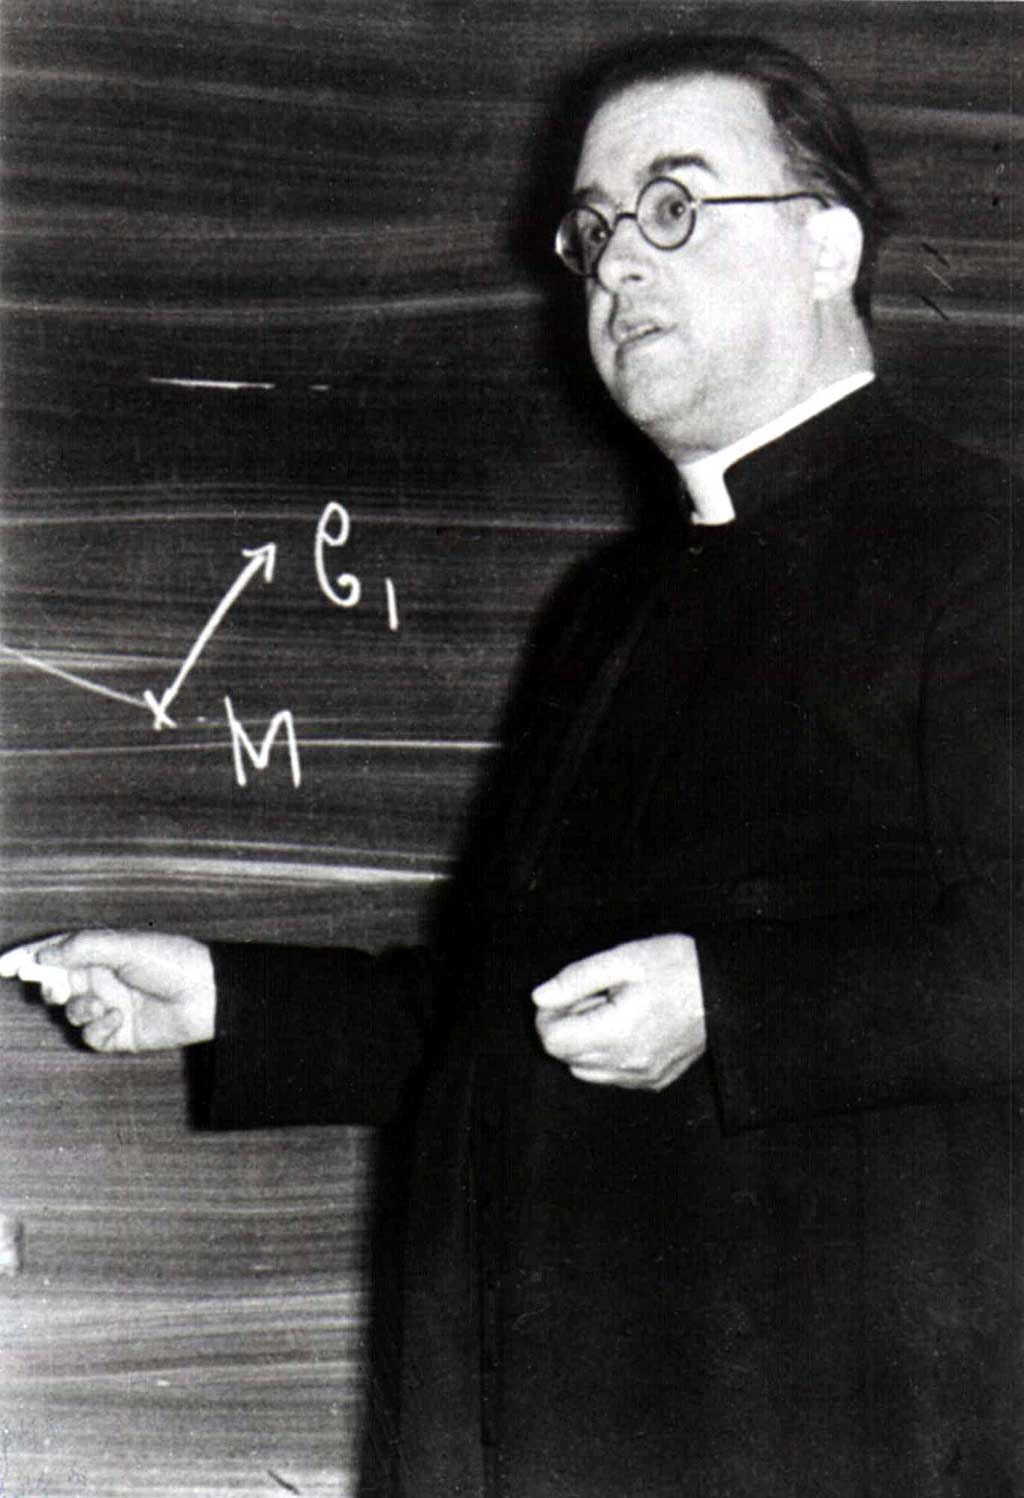 Georges Lemaître is shown writing on a chalkboard.